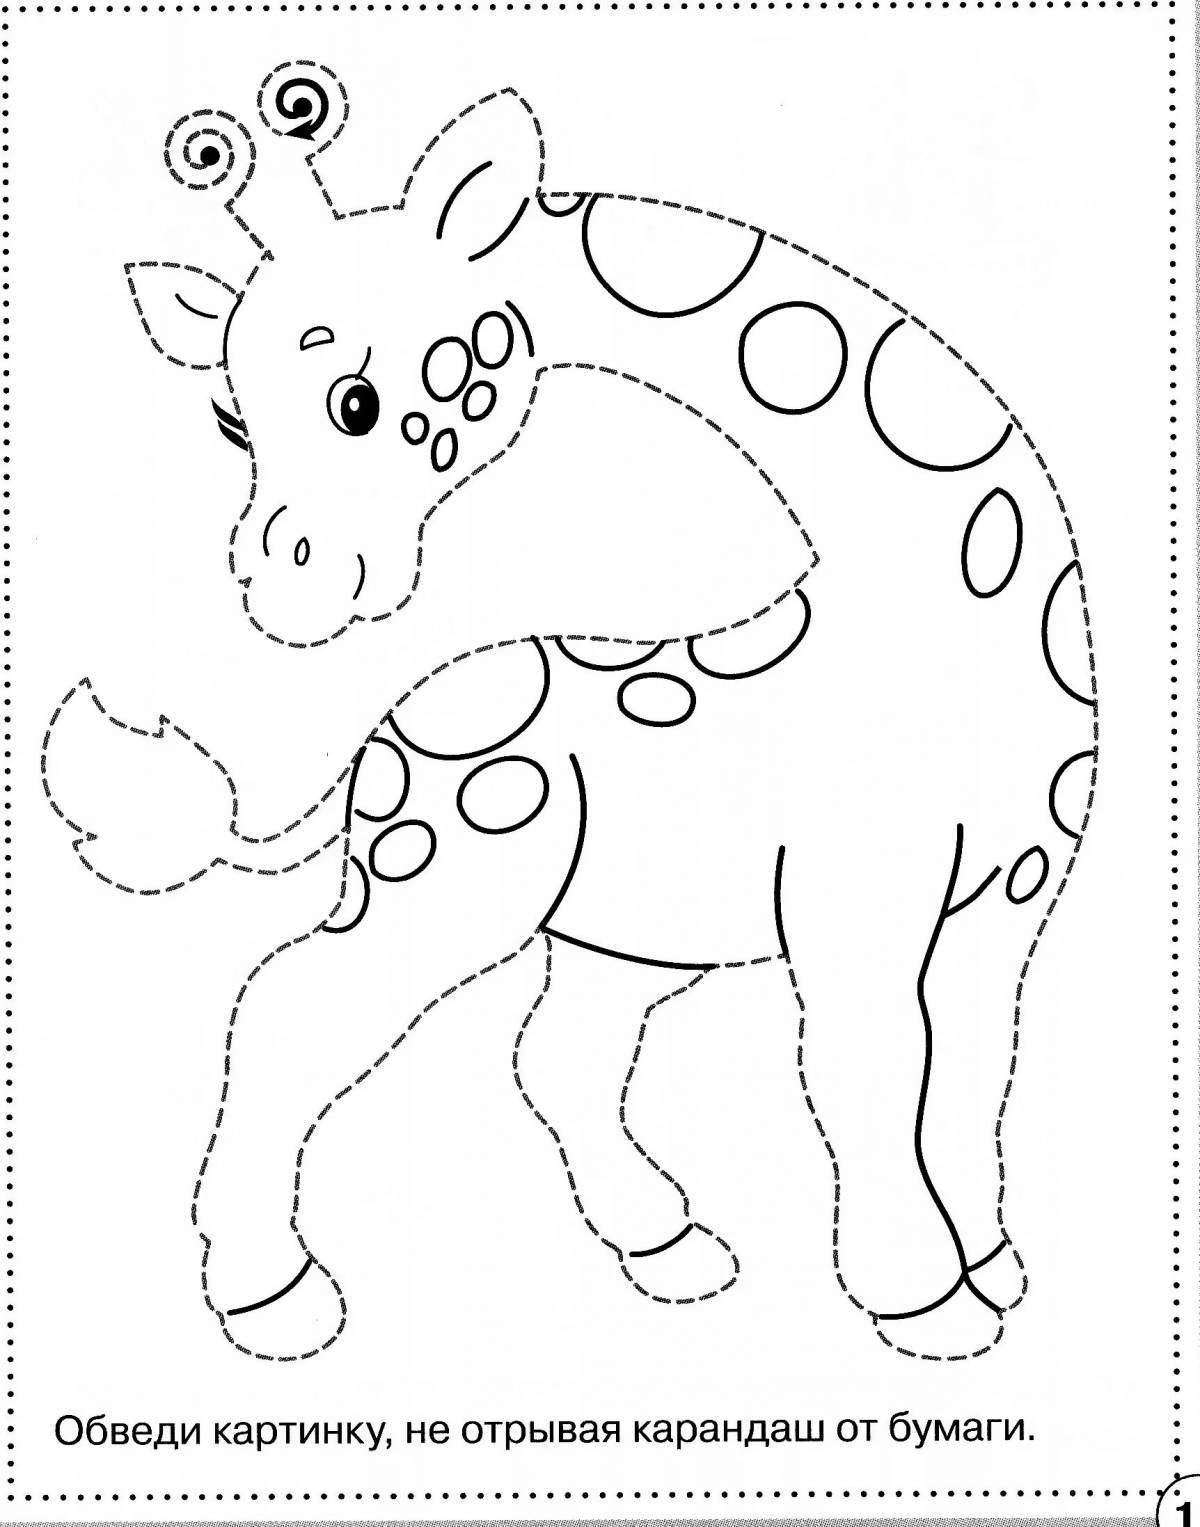 Funny coloring pages animals of hot countries for children 4 years old